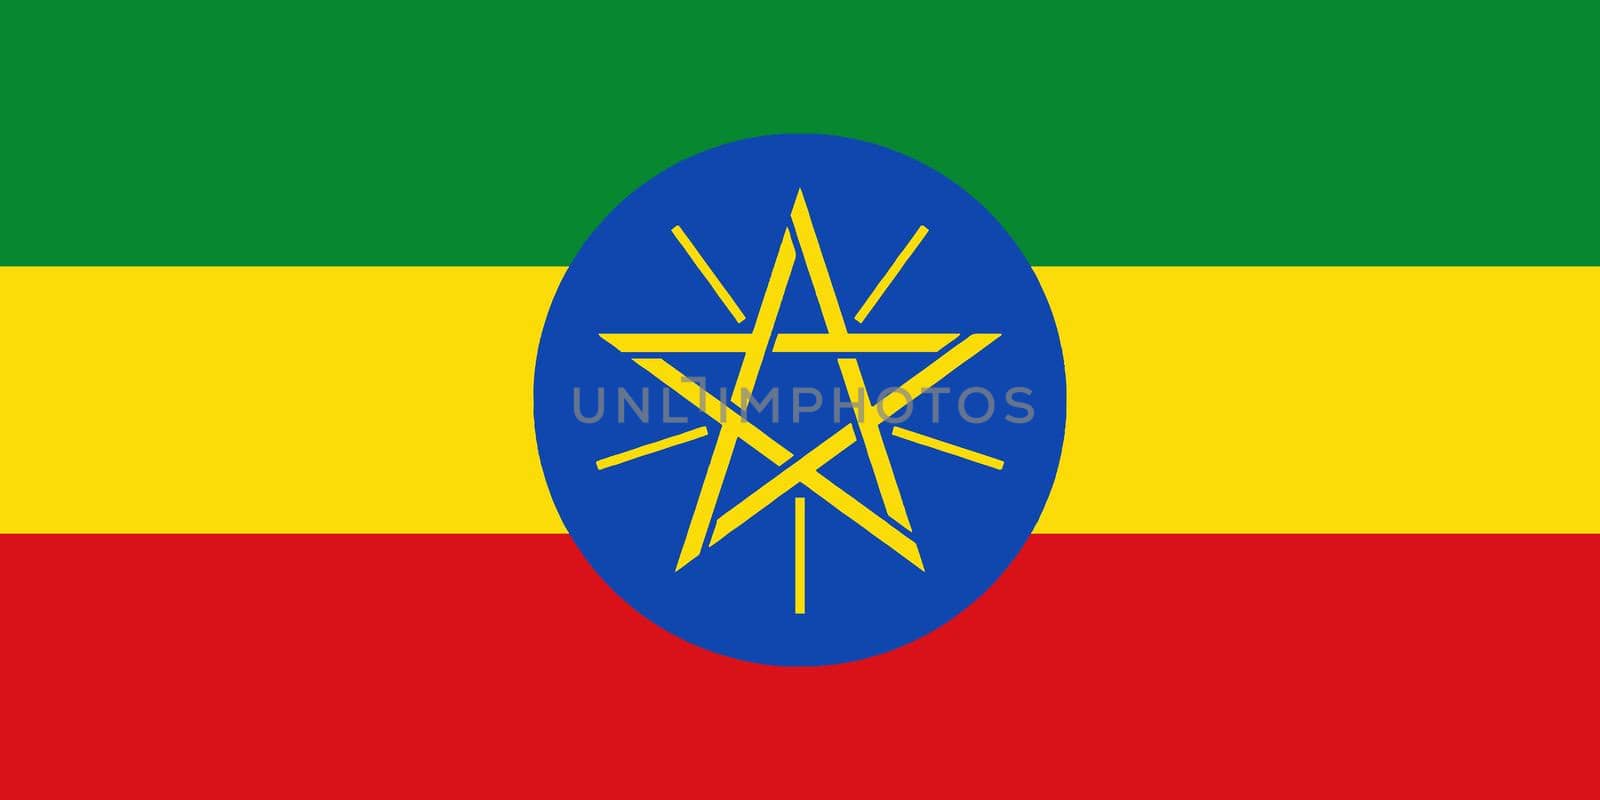 The flag of the African country of Ethiopia